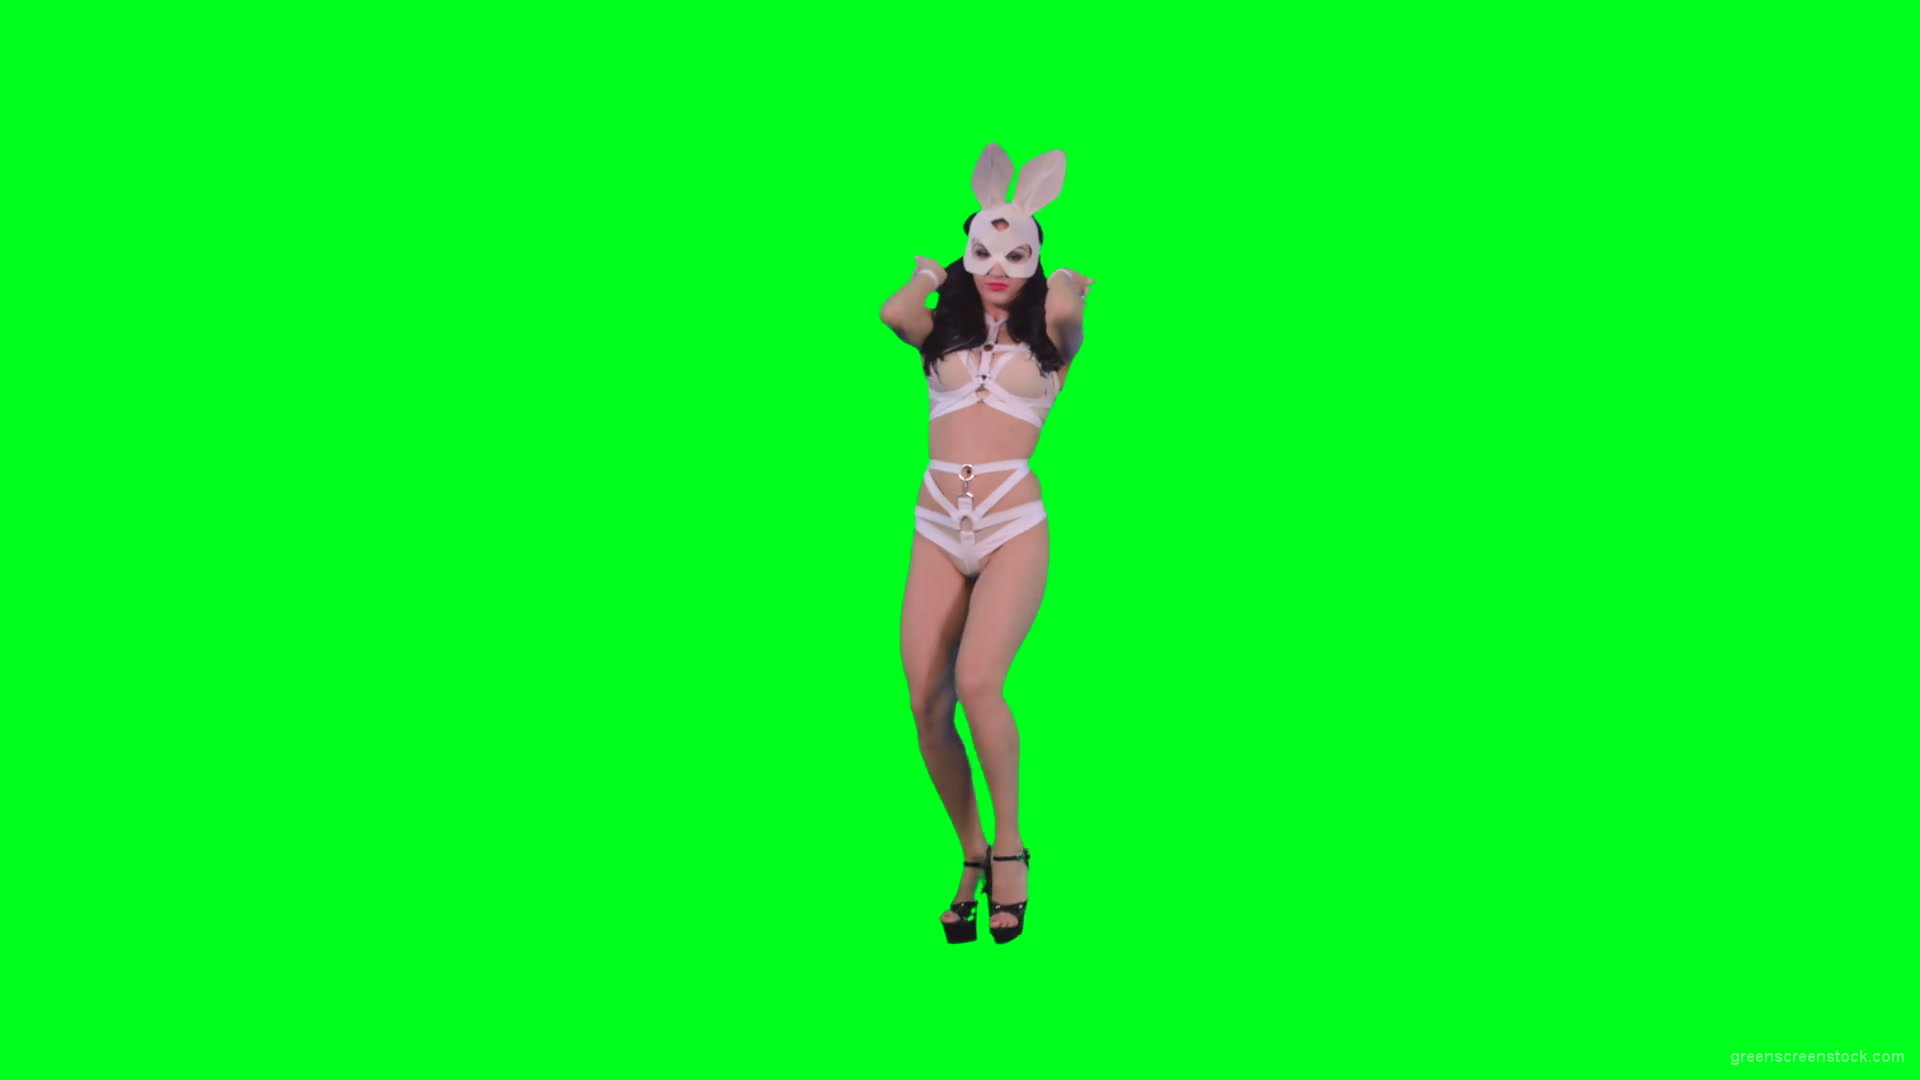 Black-hair-sexy-girl-in-playboy-costume-dancing-go-go-on-green-screen-4K-Video-Footage-1920_008 Green Screen Stock